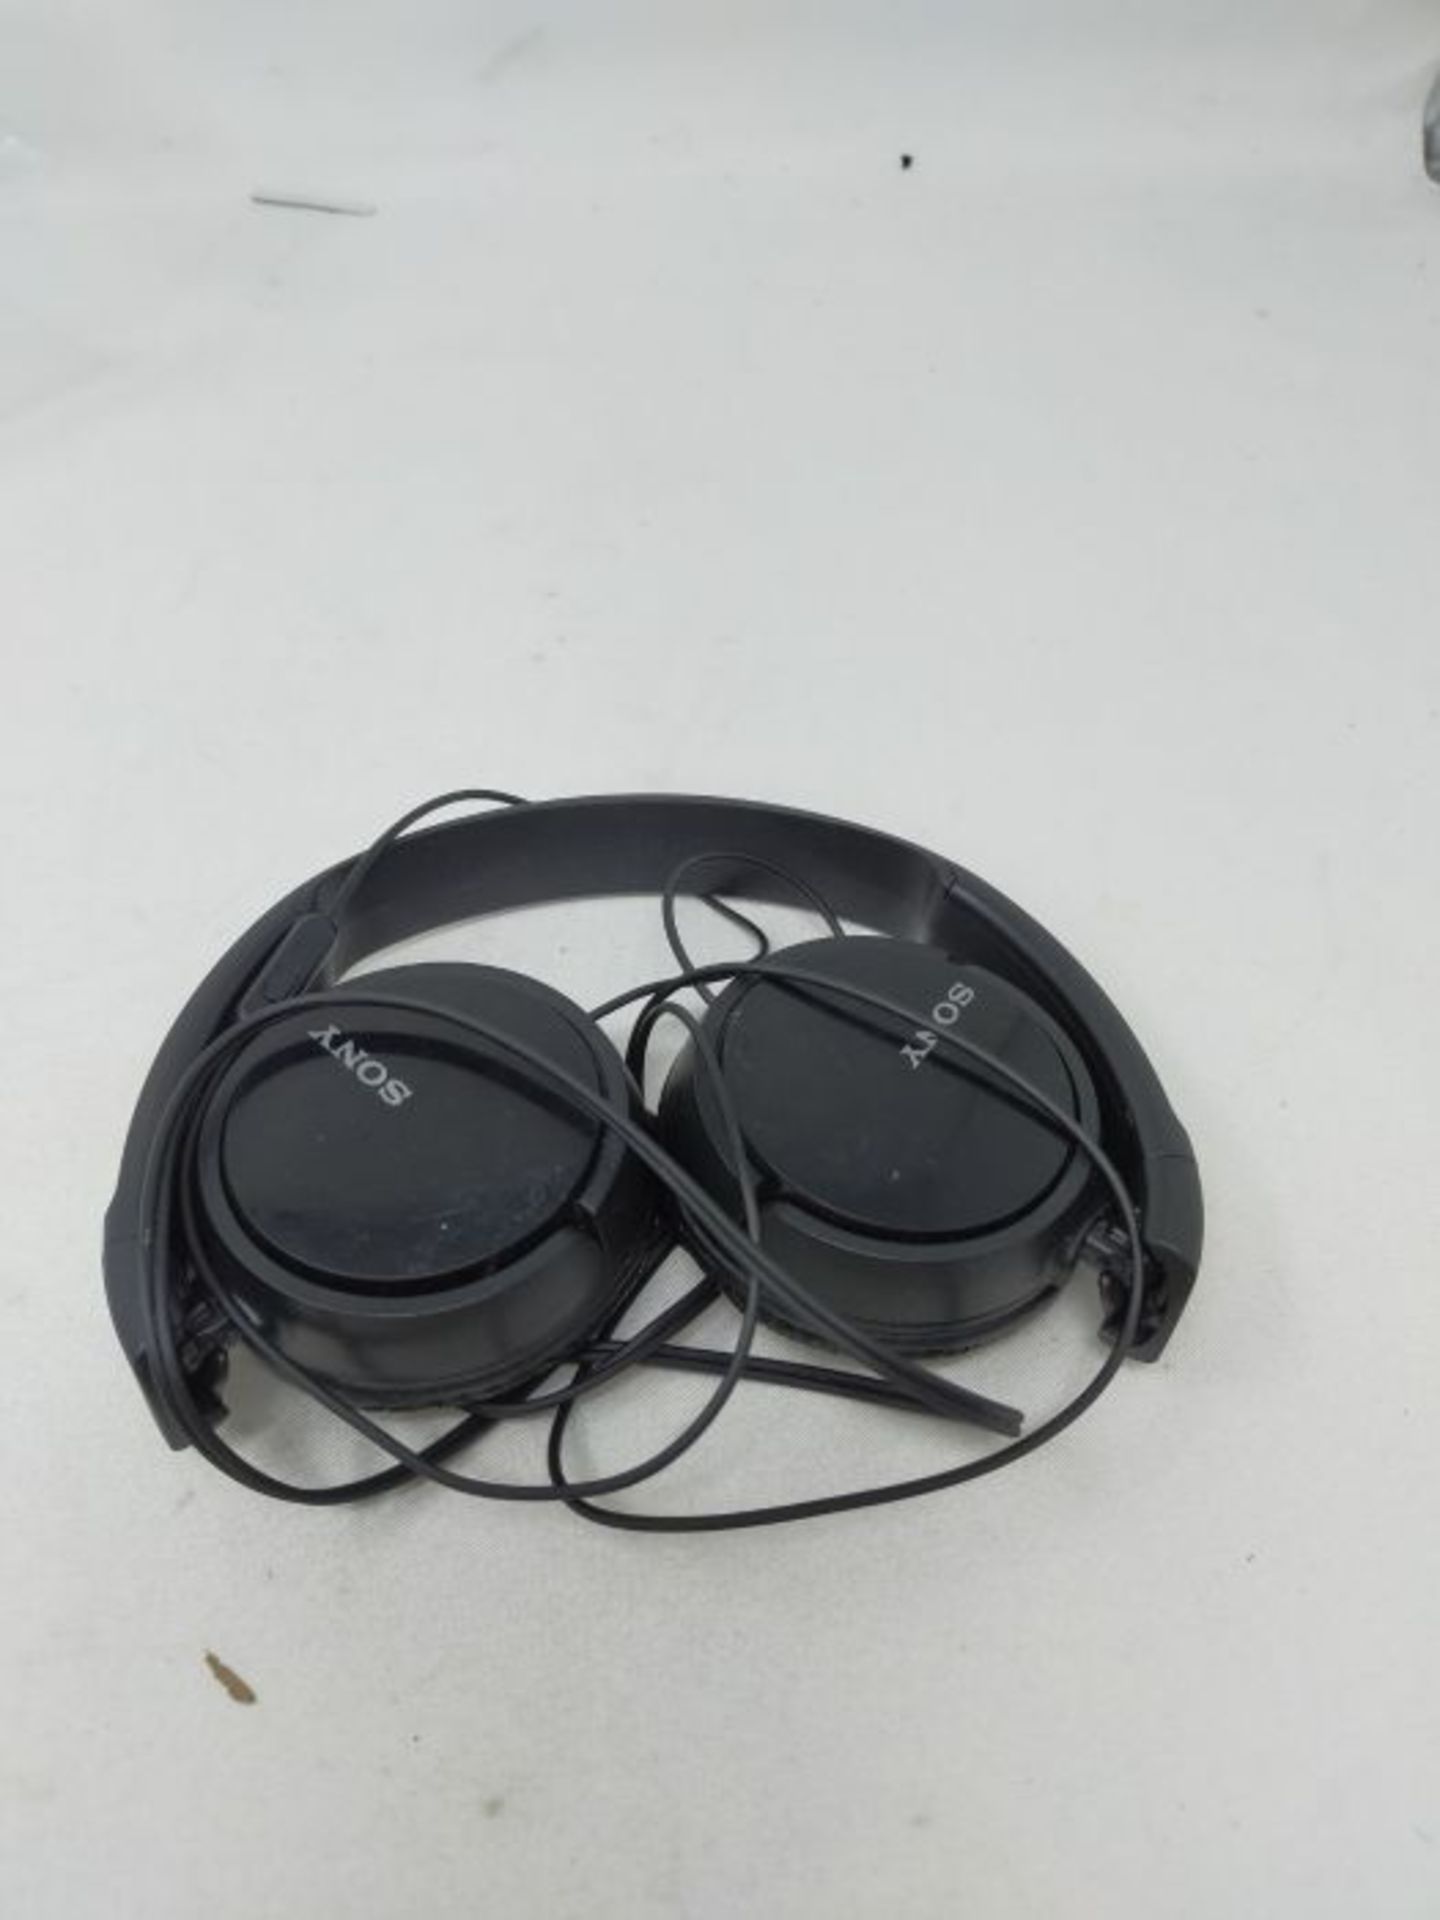 Sony MDR-ZX110AP Overhead Headphones with In-Line Control - Black - Image 3 of 3